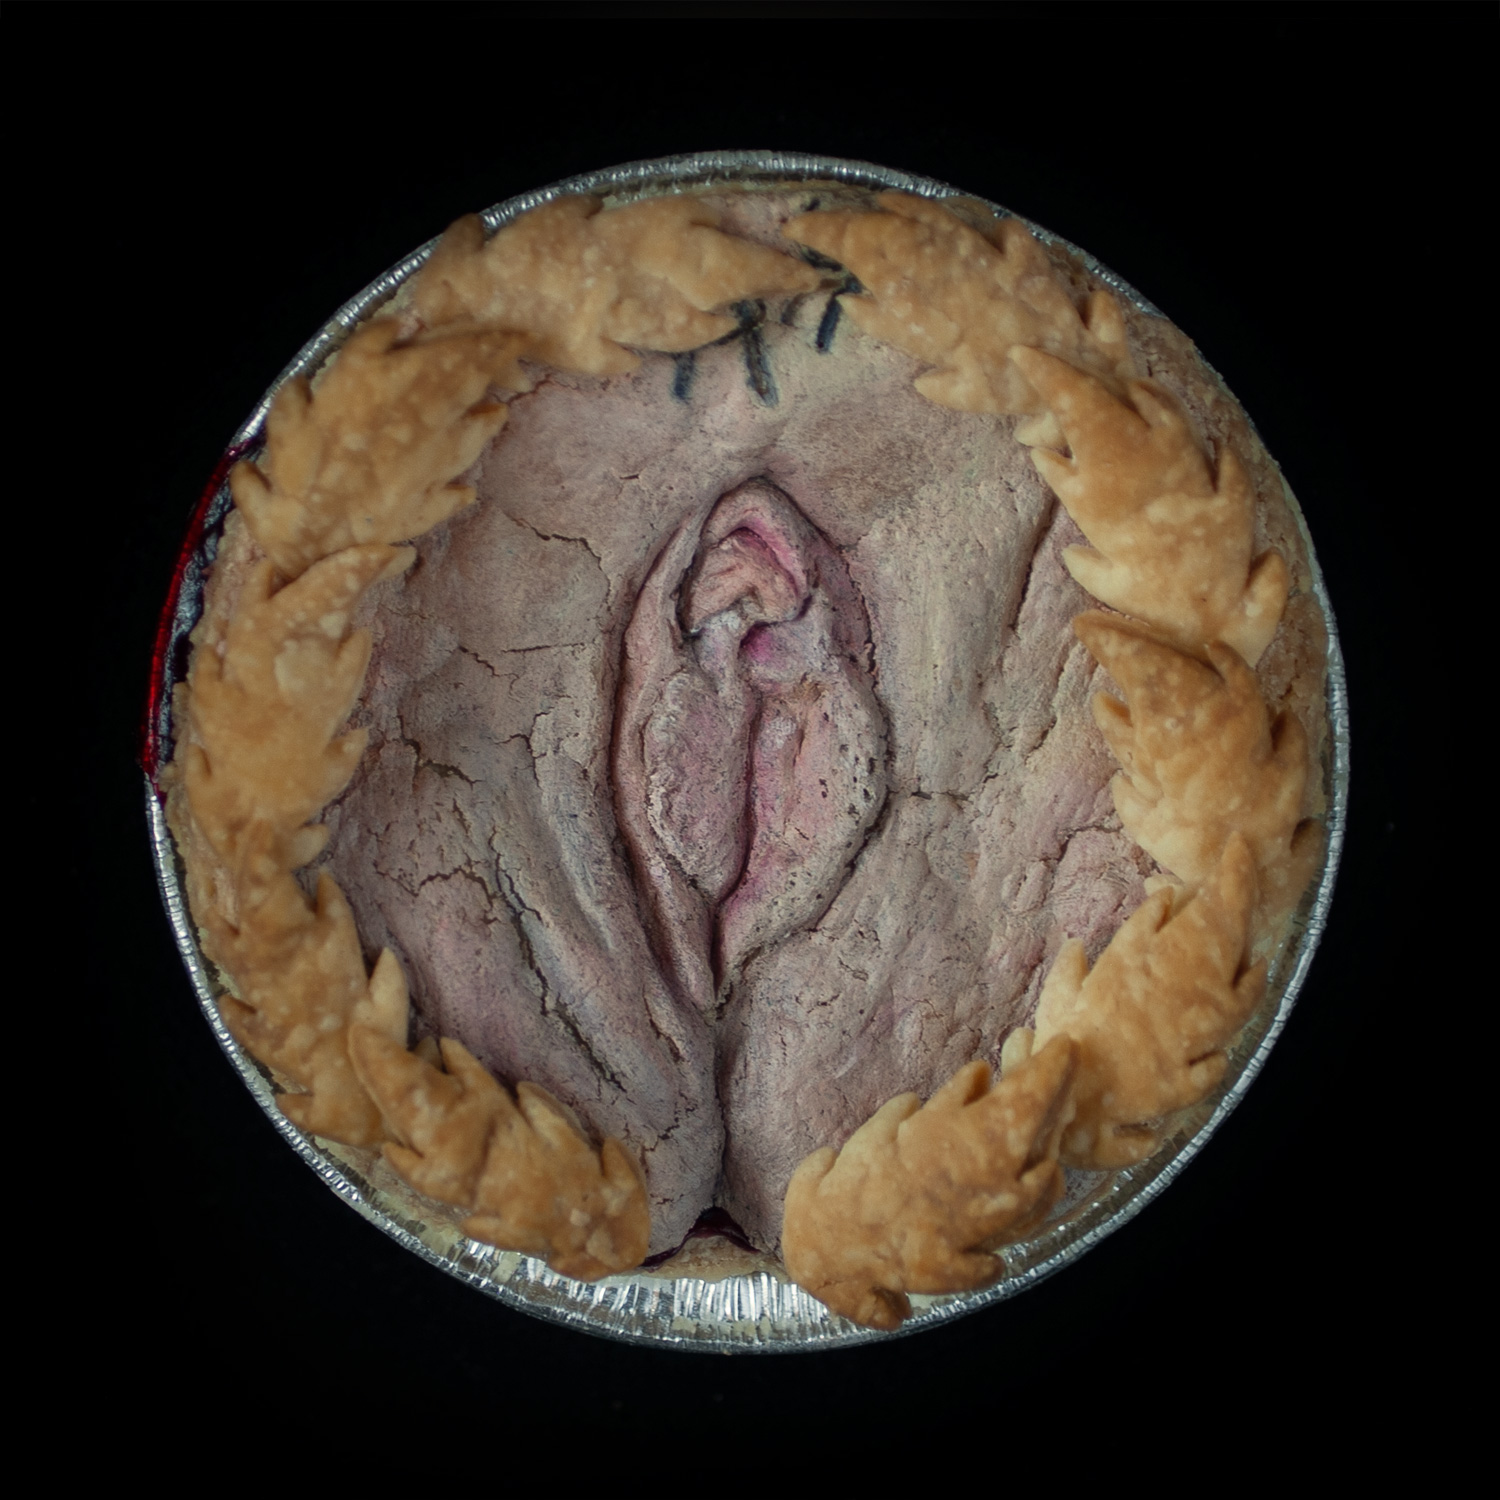 A baked vulva pie on a black background. The pie is surrounded with pie crust leaves and is painted to look like a realistic vulva. 